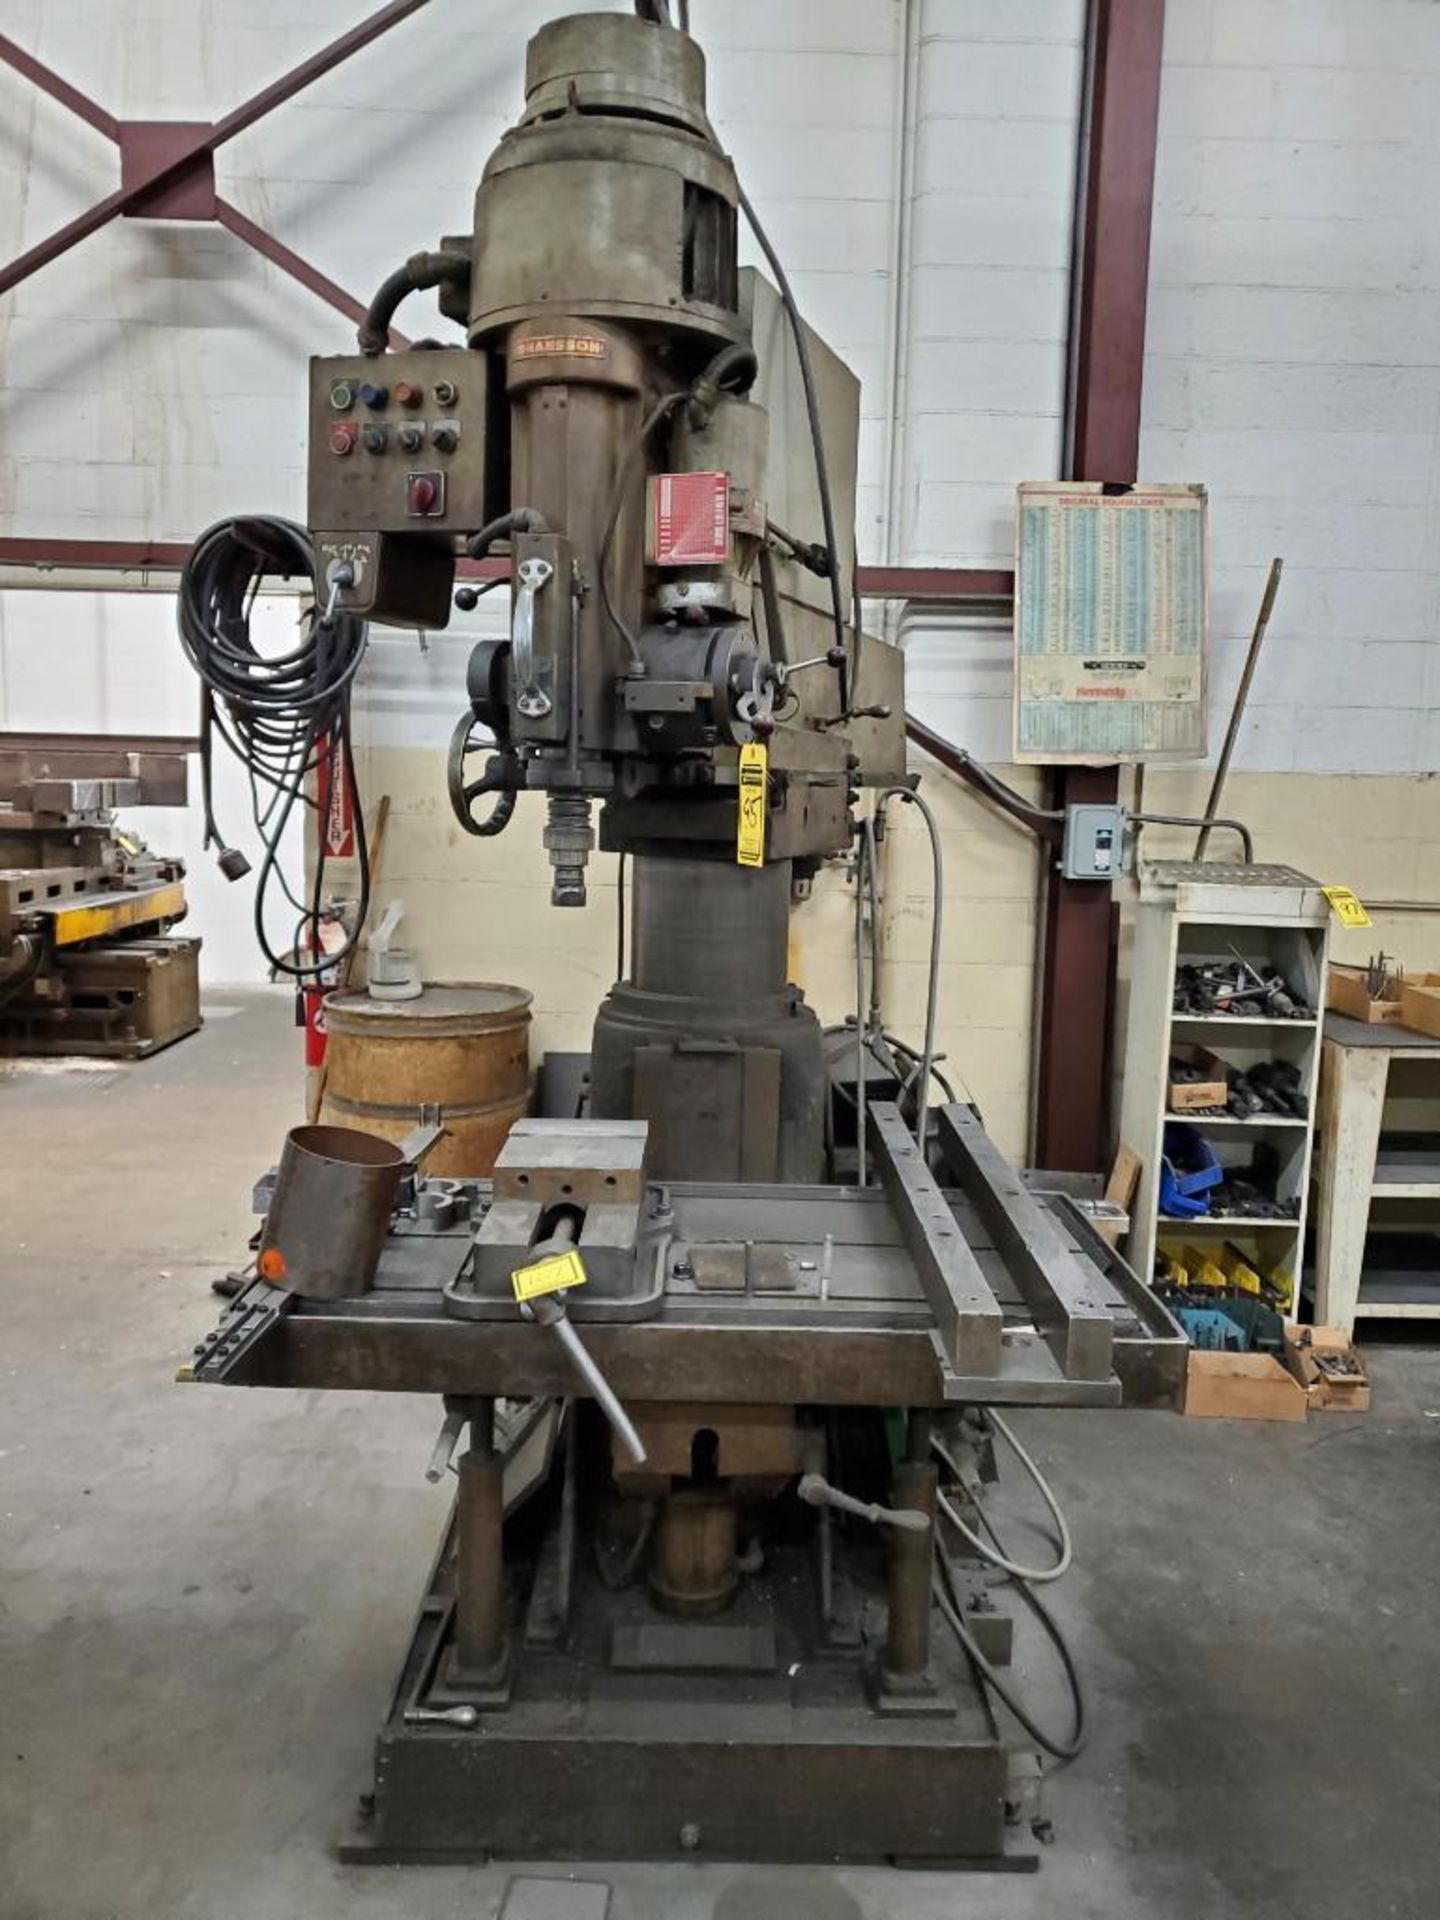 Johansson Radial Arm Drill, 67" Traverse Arm, 45" X 22" Knee Bed Front Table, 24" X 24" X 20" Angle - Image 3 of 14